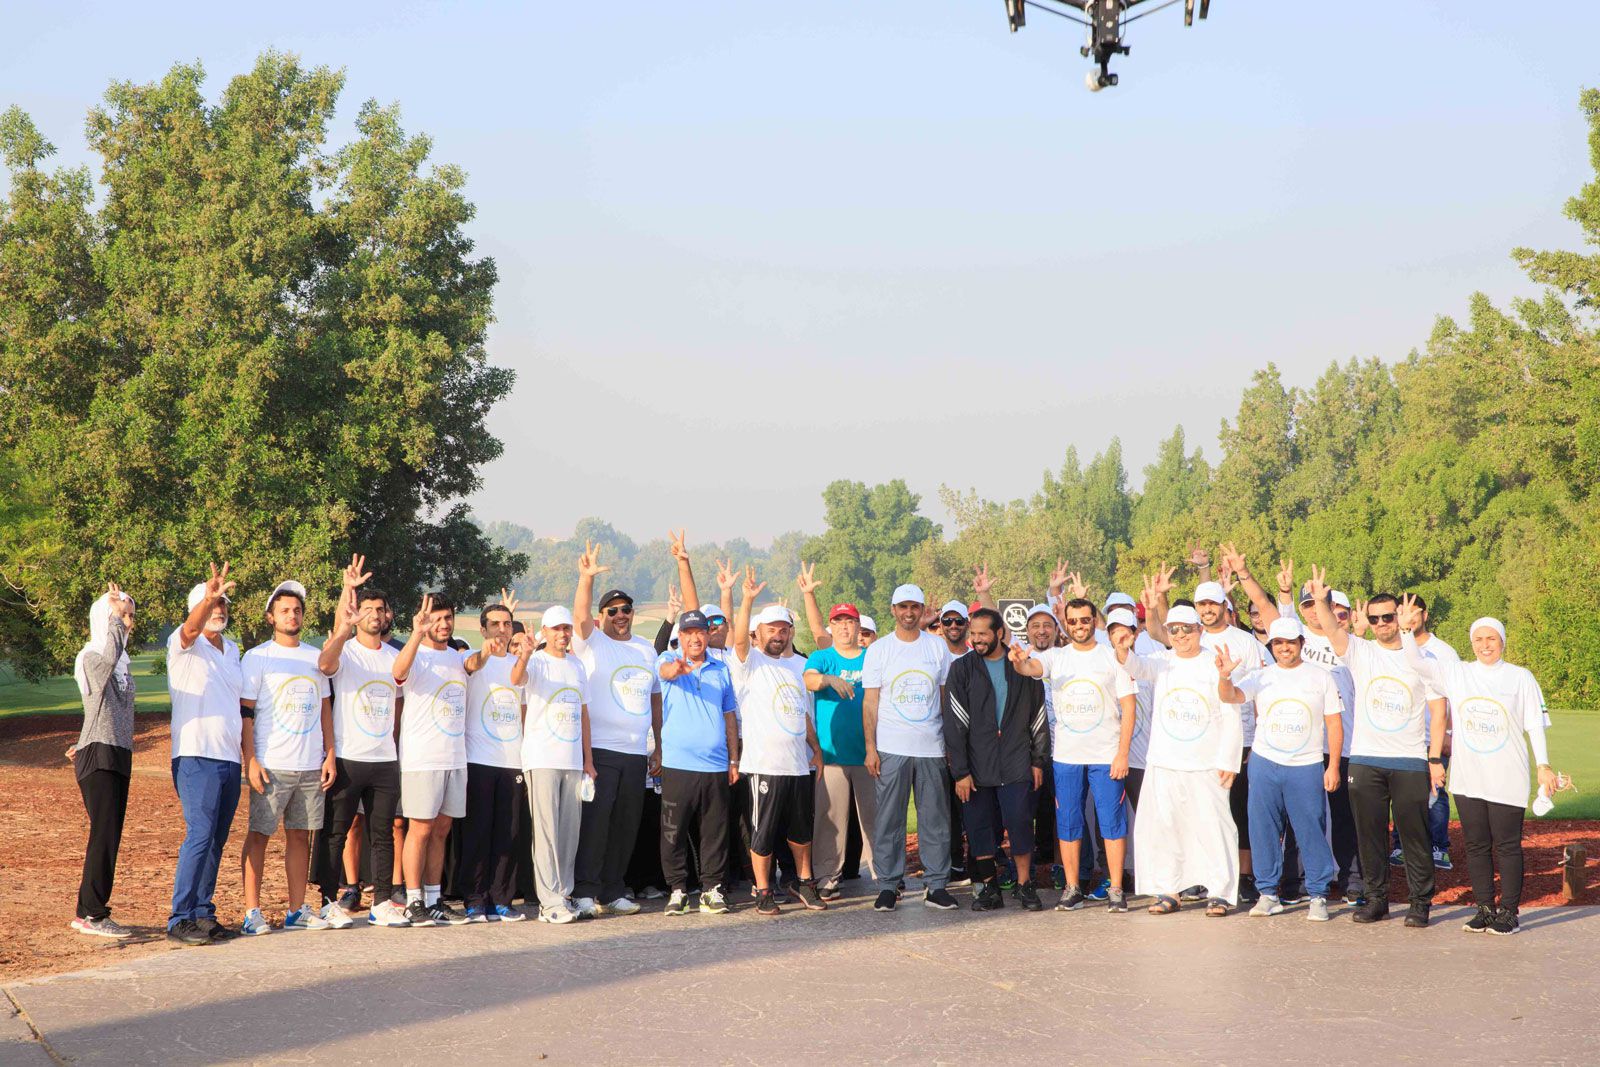 Dubai Land Department chooses Jumeirah Golf Estates to kick off its first ever Real Estate Fitness Challenge